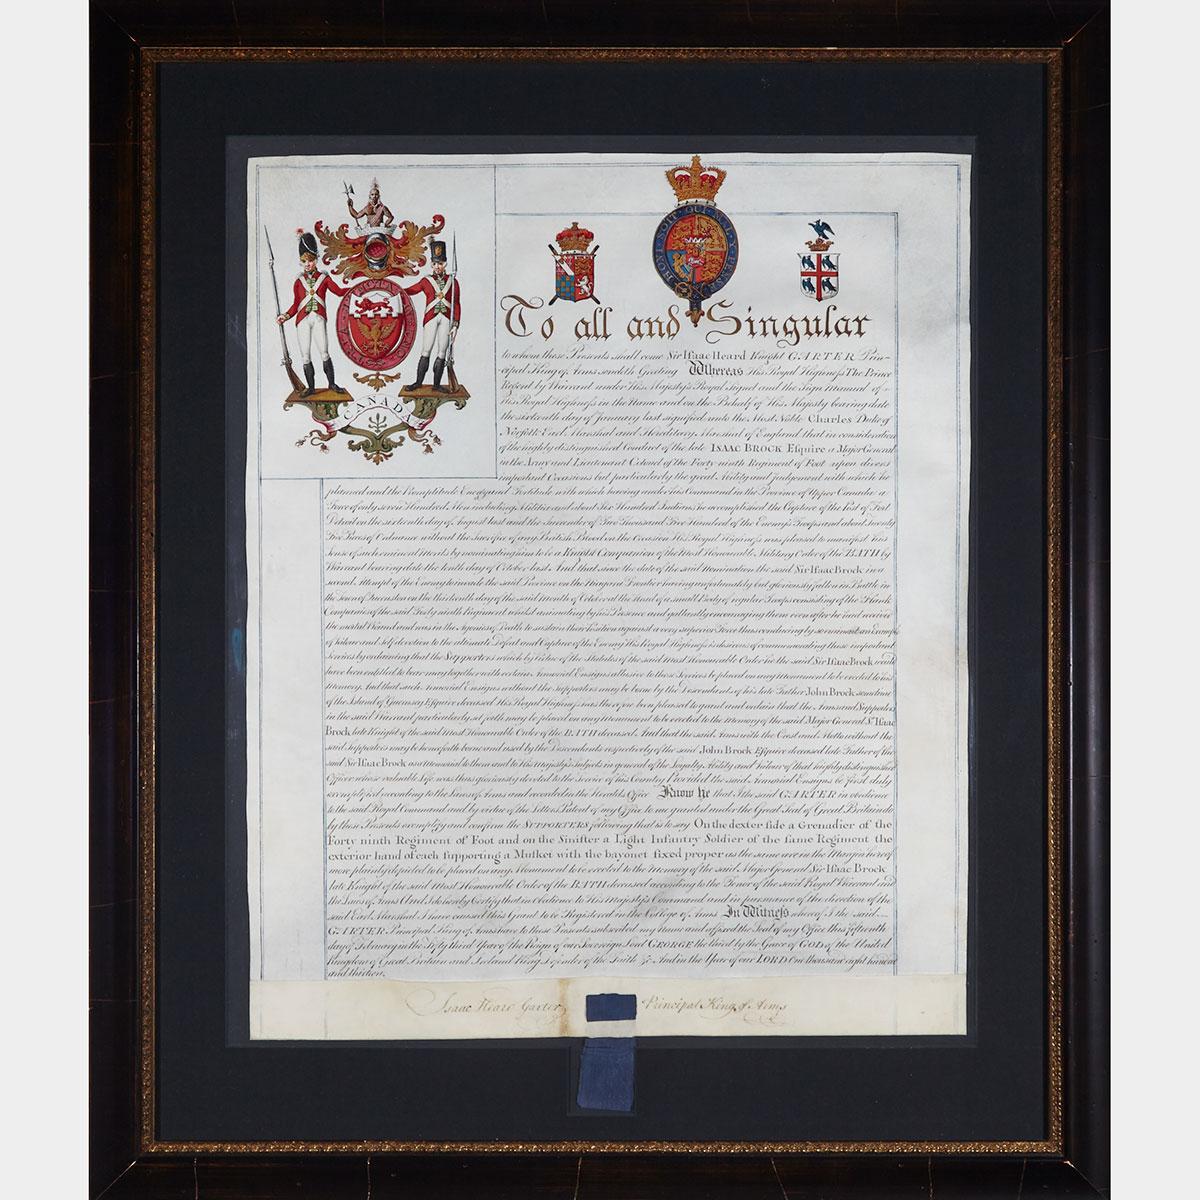 Royal Letters Patent Grant of Arms to Knight Companion of the Most Honourable Military Order of the Bath to Sir Isaac Brock, January 16th, 1813